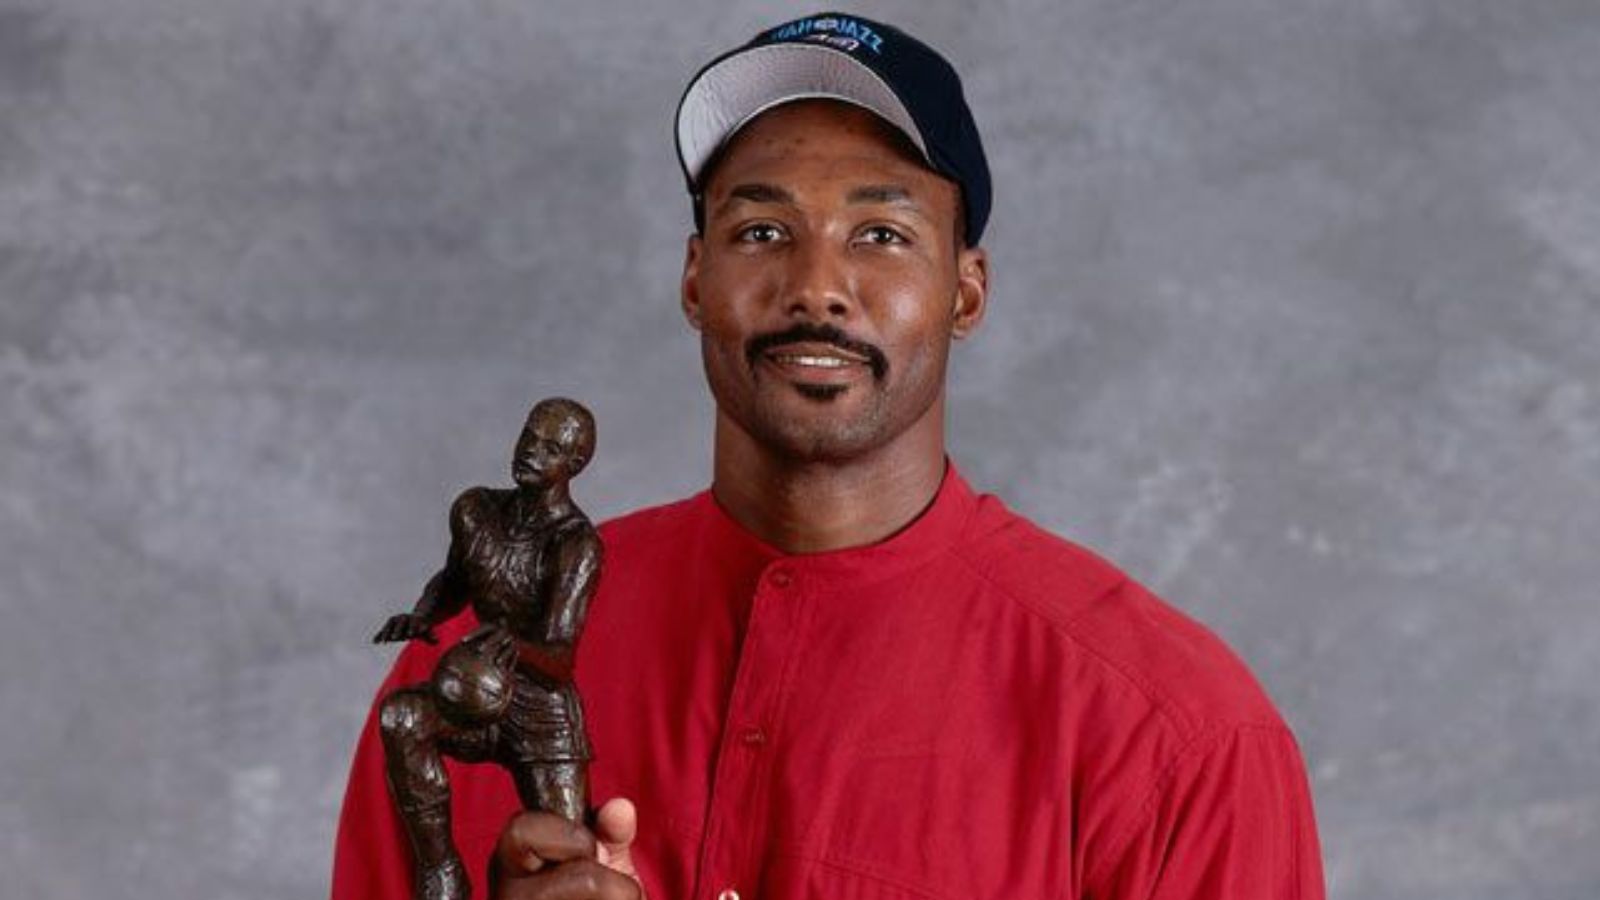 “Despite making $100 million, Karl Malone rejected paying $200 or